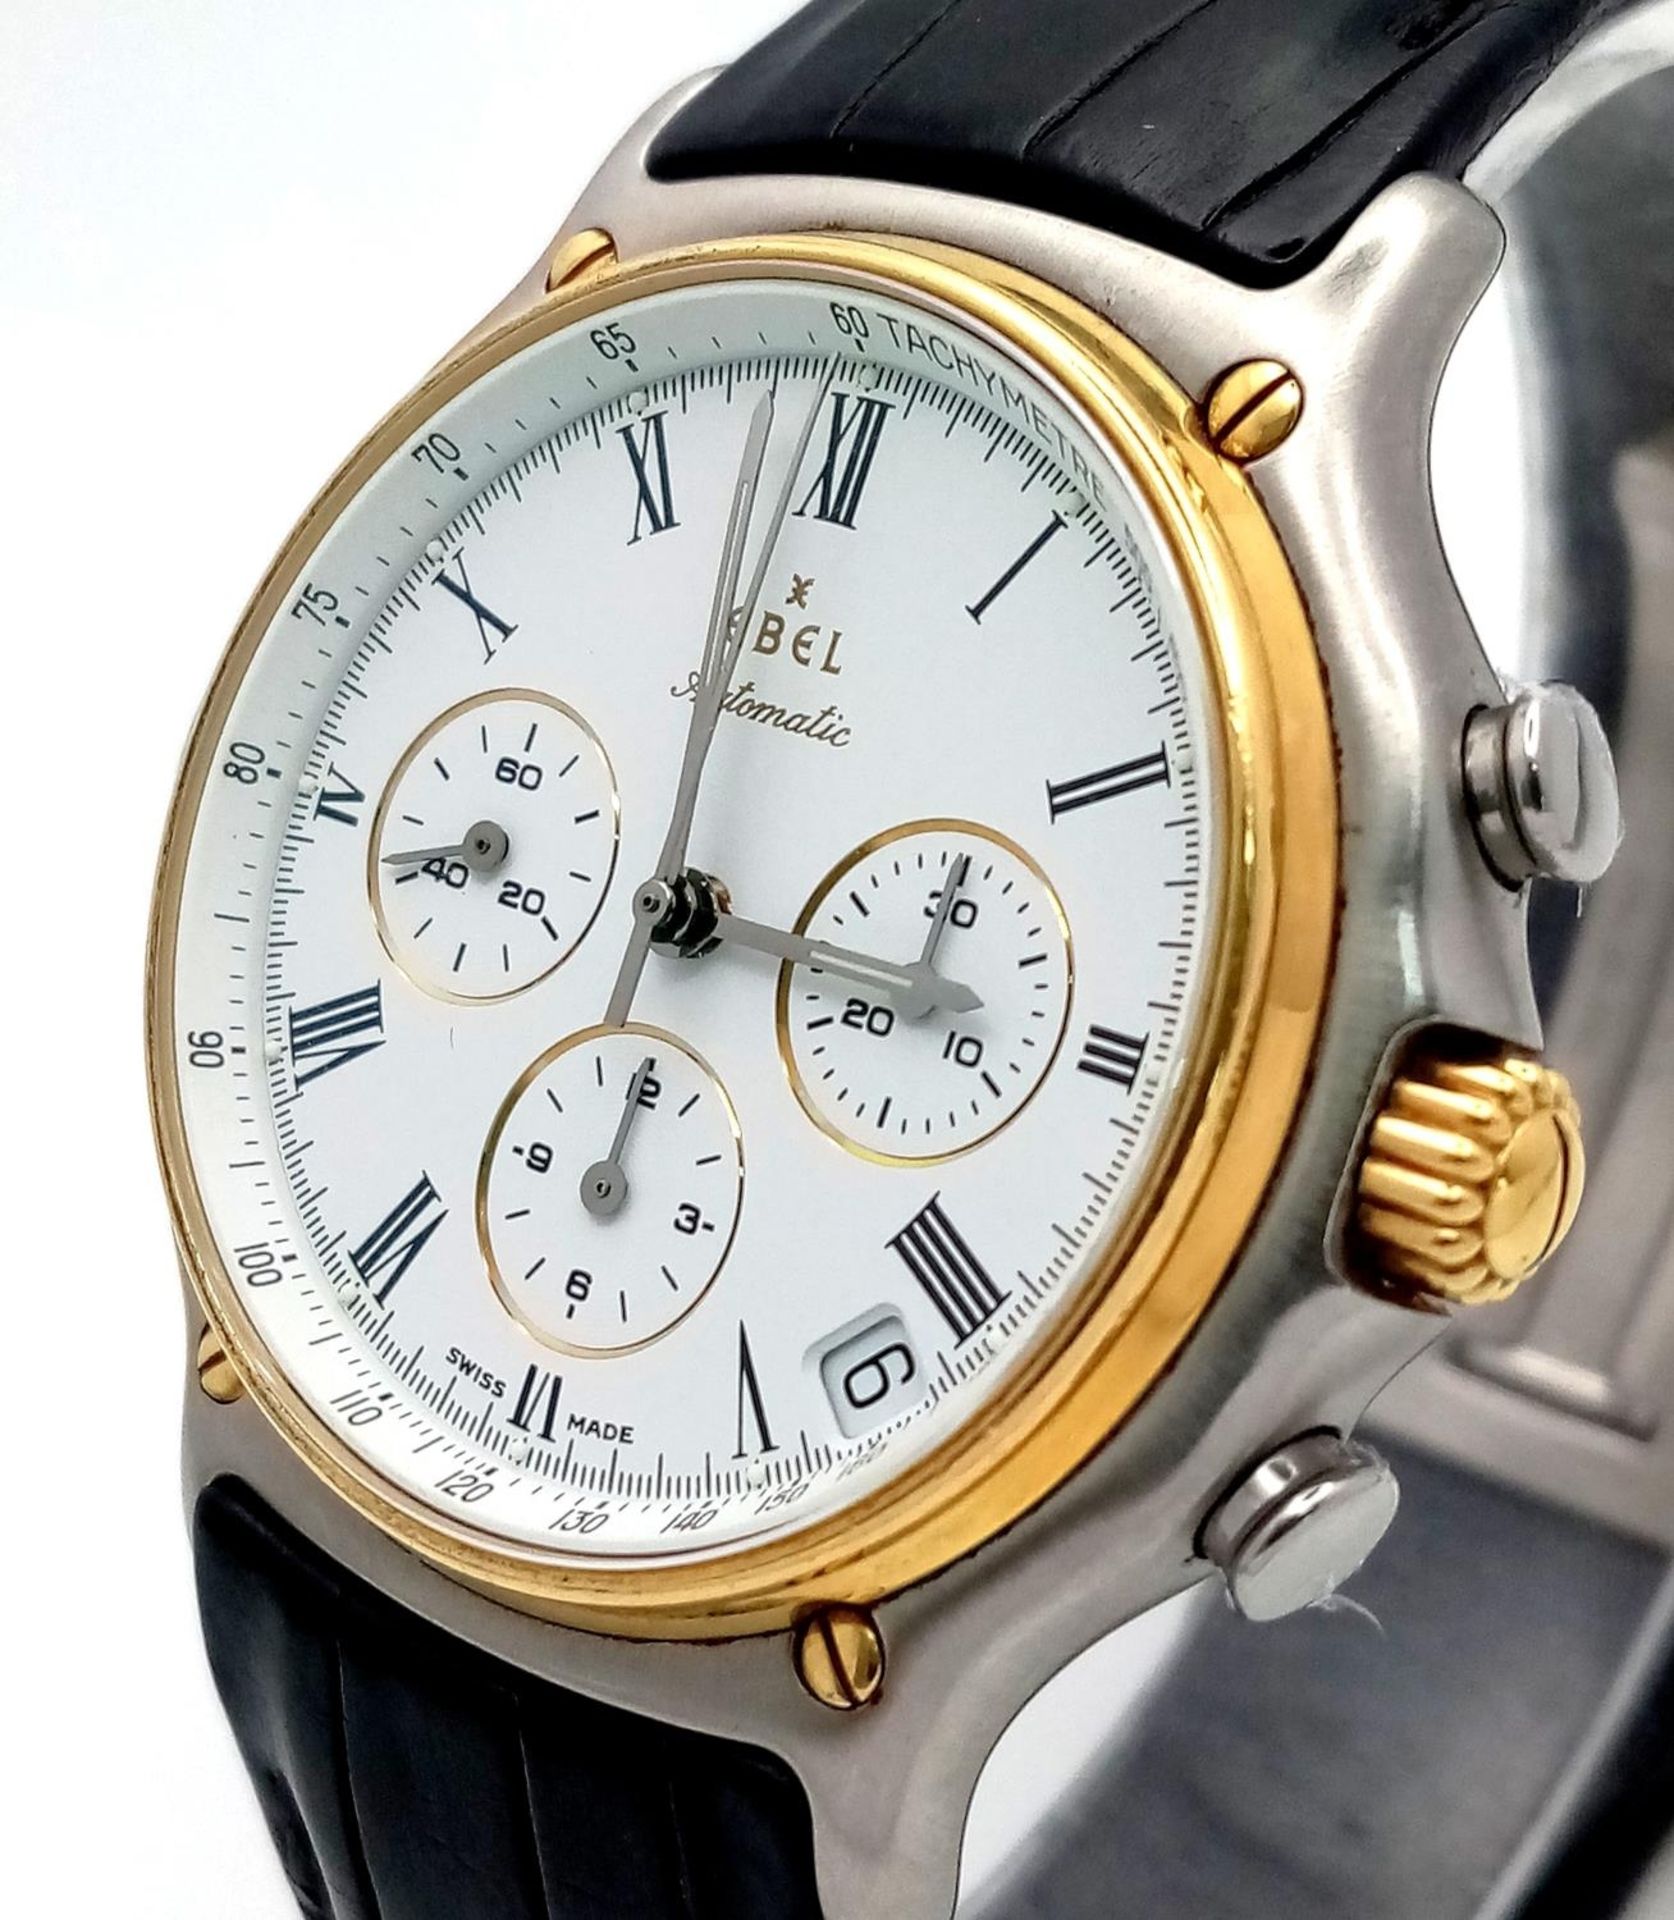 An Ebel Automatic Chronograph Gents Watch. Black leather strap. Two tone case - 38mm. White dial - Bild 2 aus 8